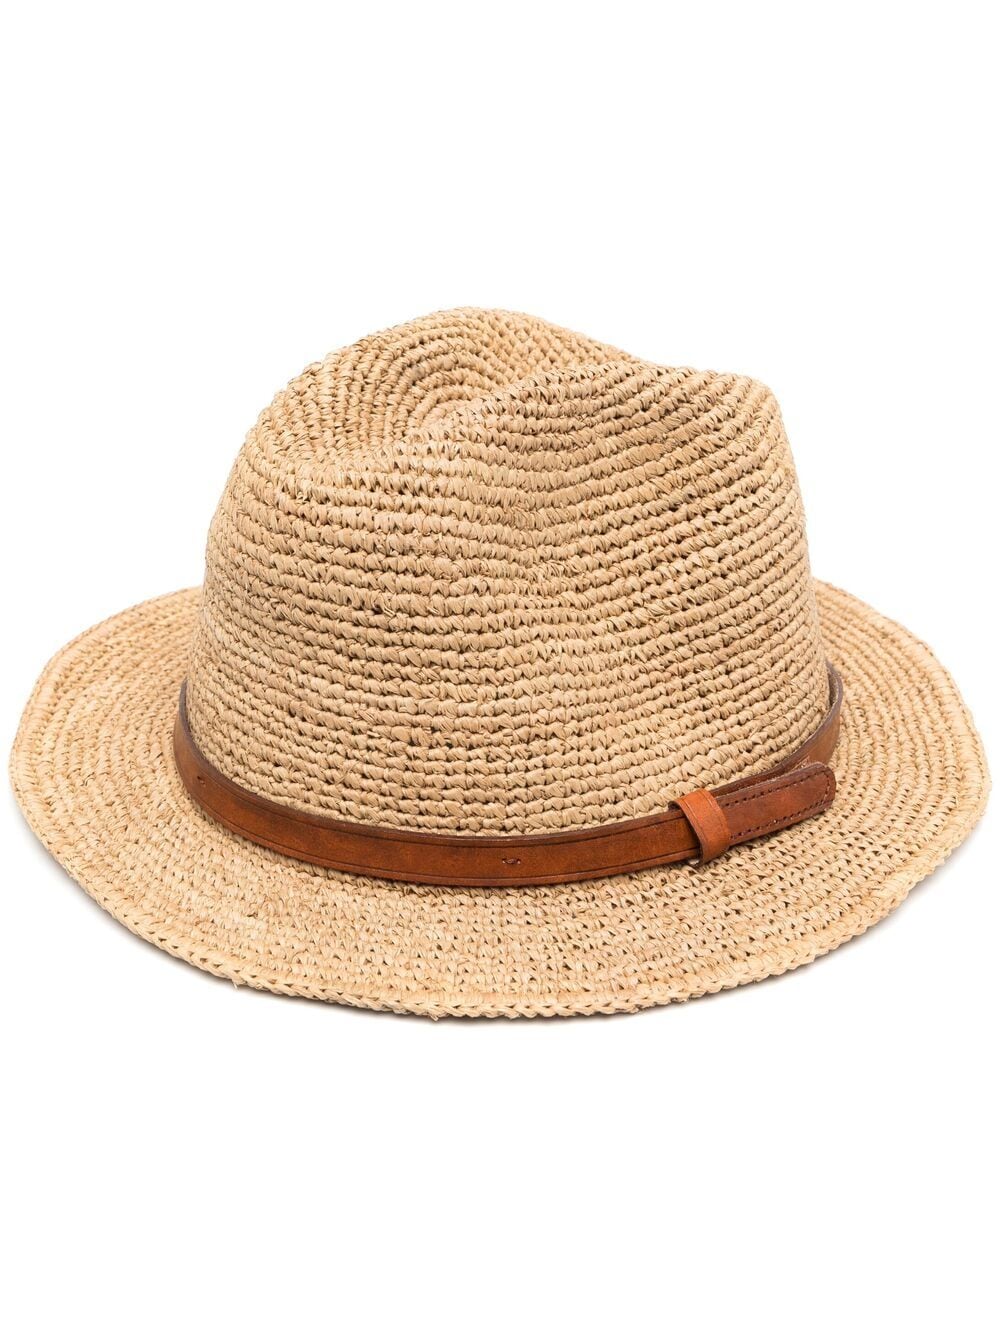 Ibeliv Lubeman Woven Straw Hat In Brown